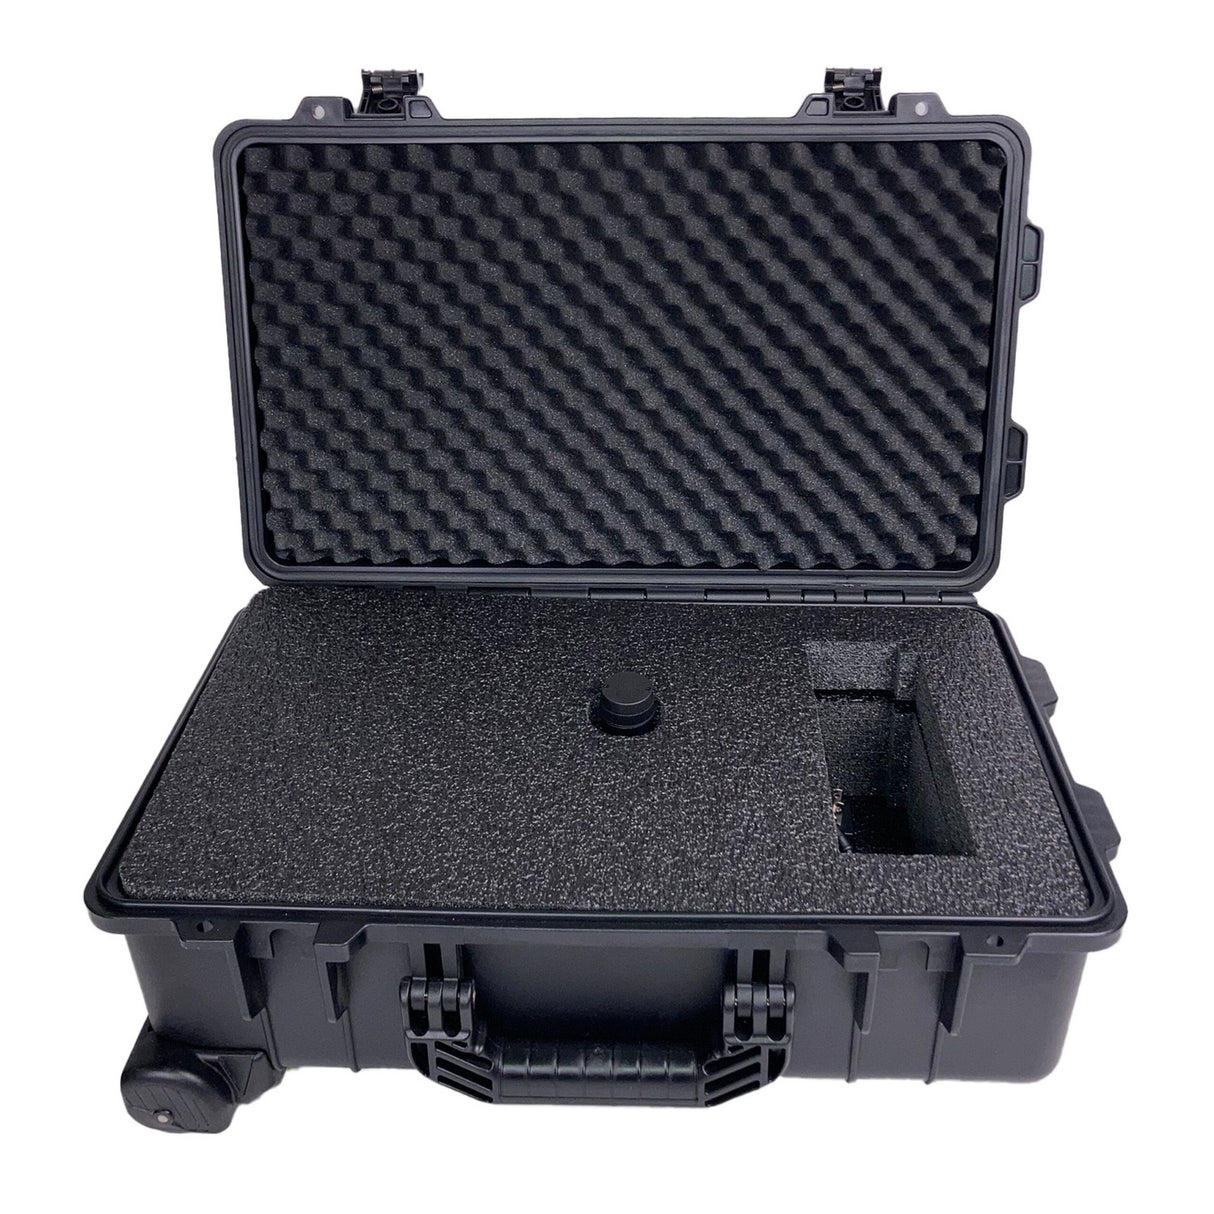 Datavideo HC-650F Water/Dust Resistant High Impact Case for RMC-180